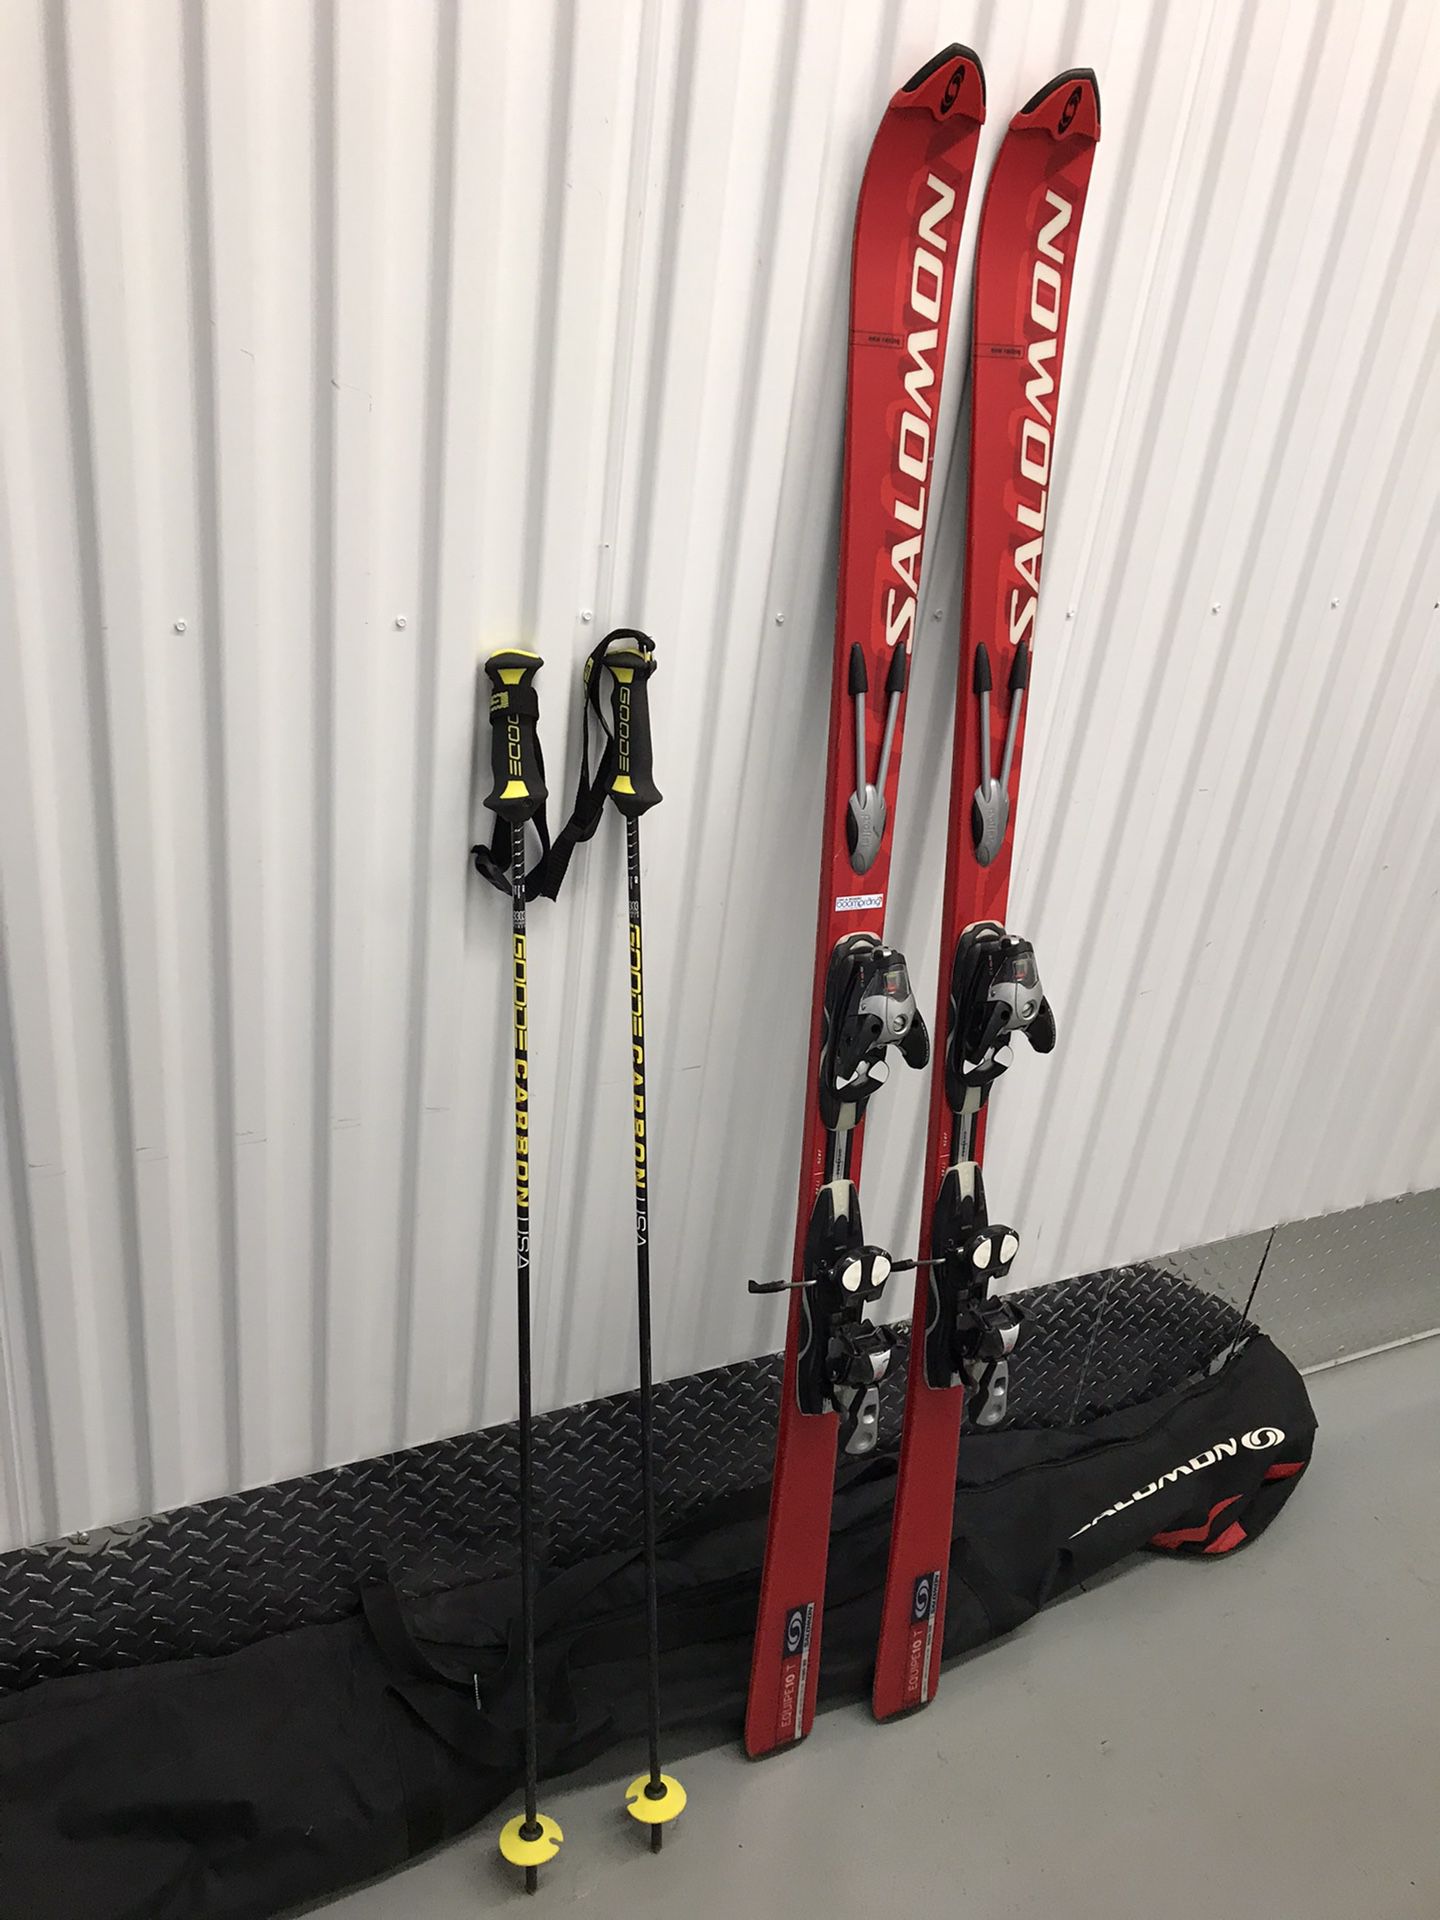 Salomon 10T 168cm Ski With Bindings, Poles & Carrying Bag for Sale in Chicago, IL - OfferUp